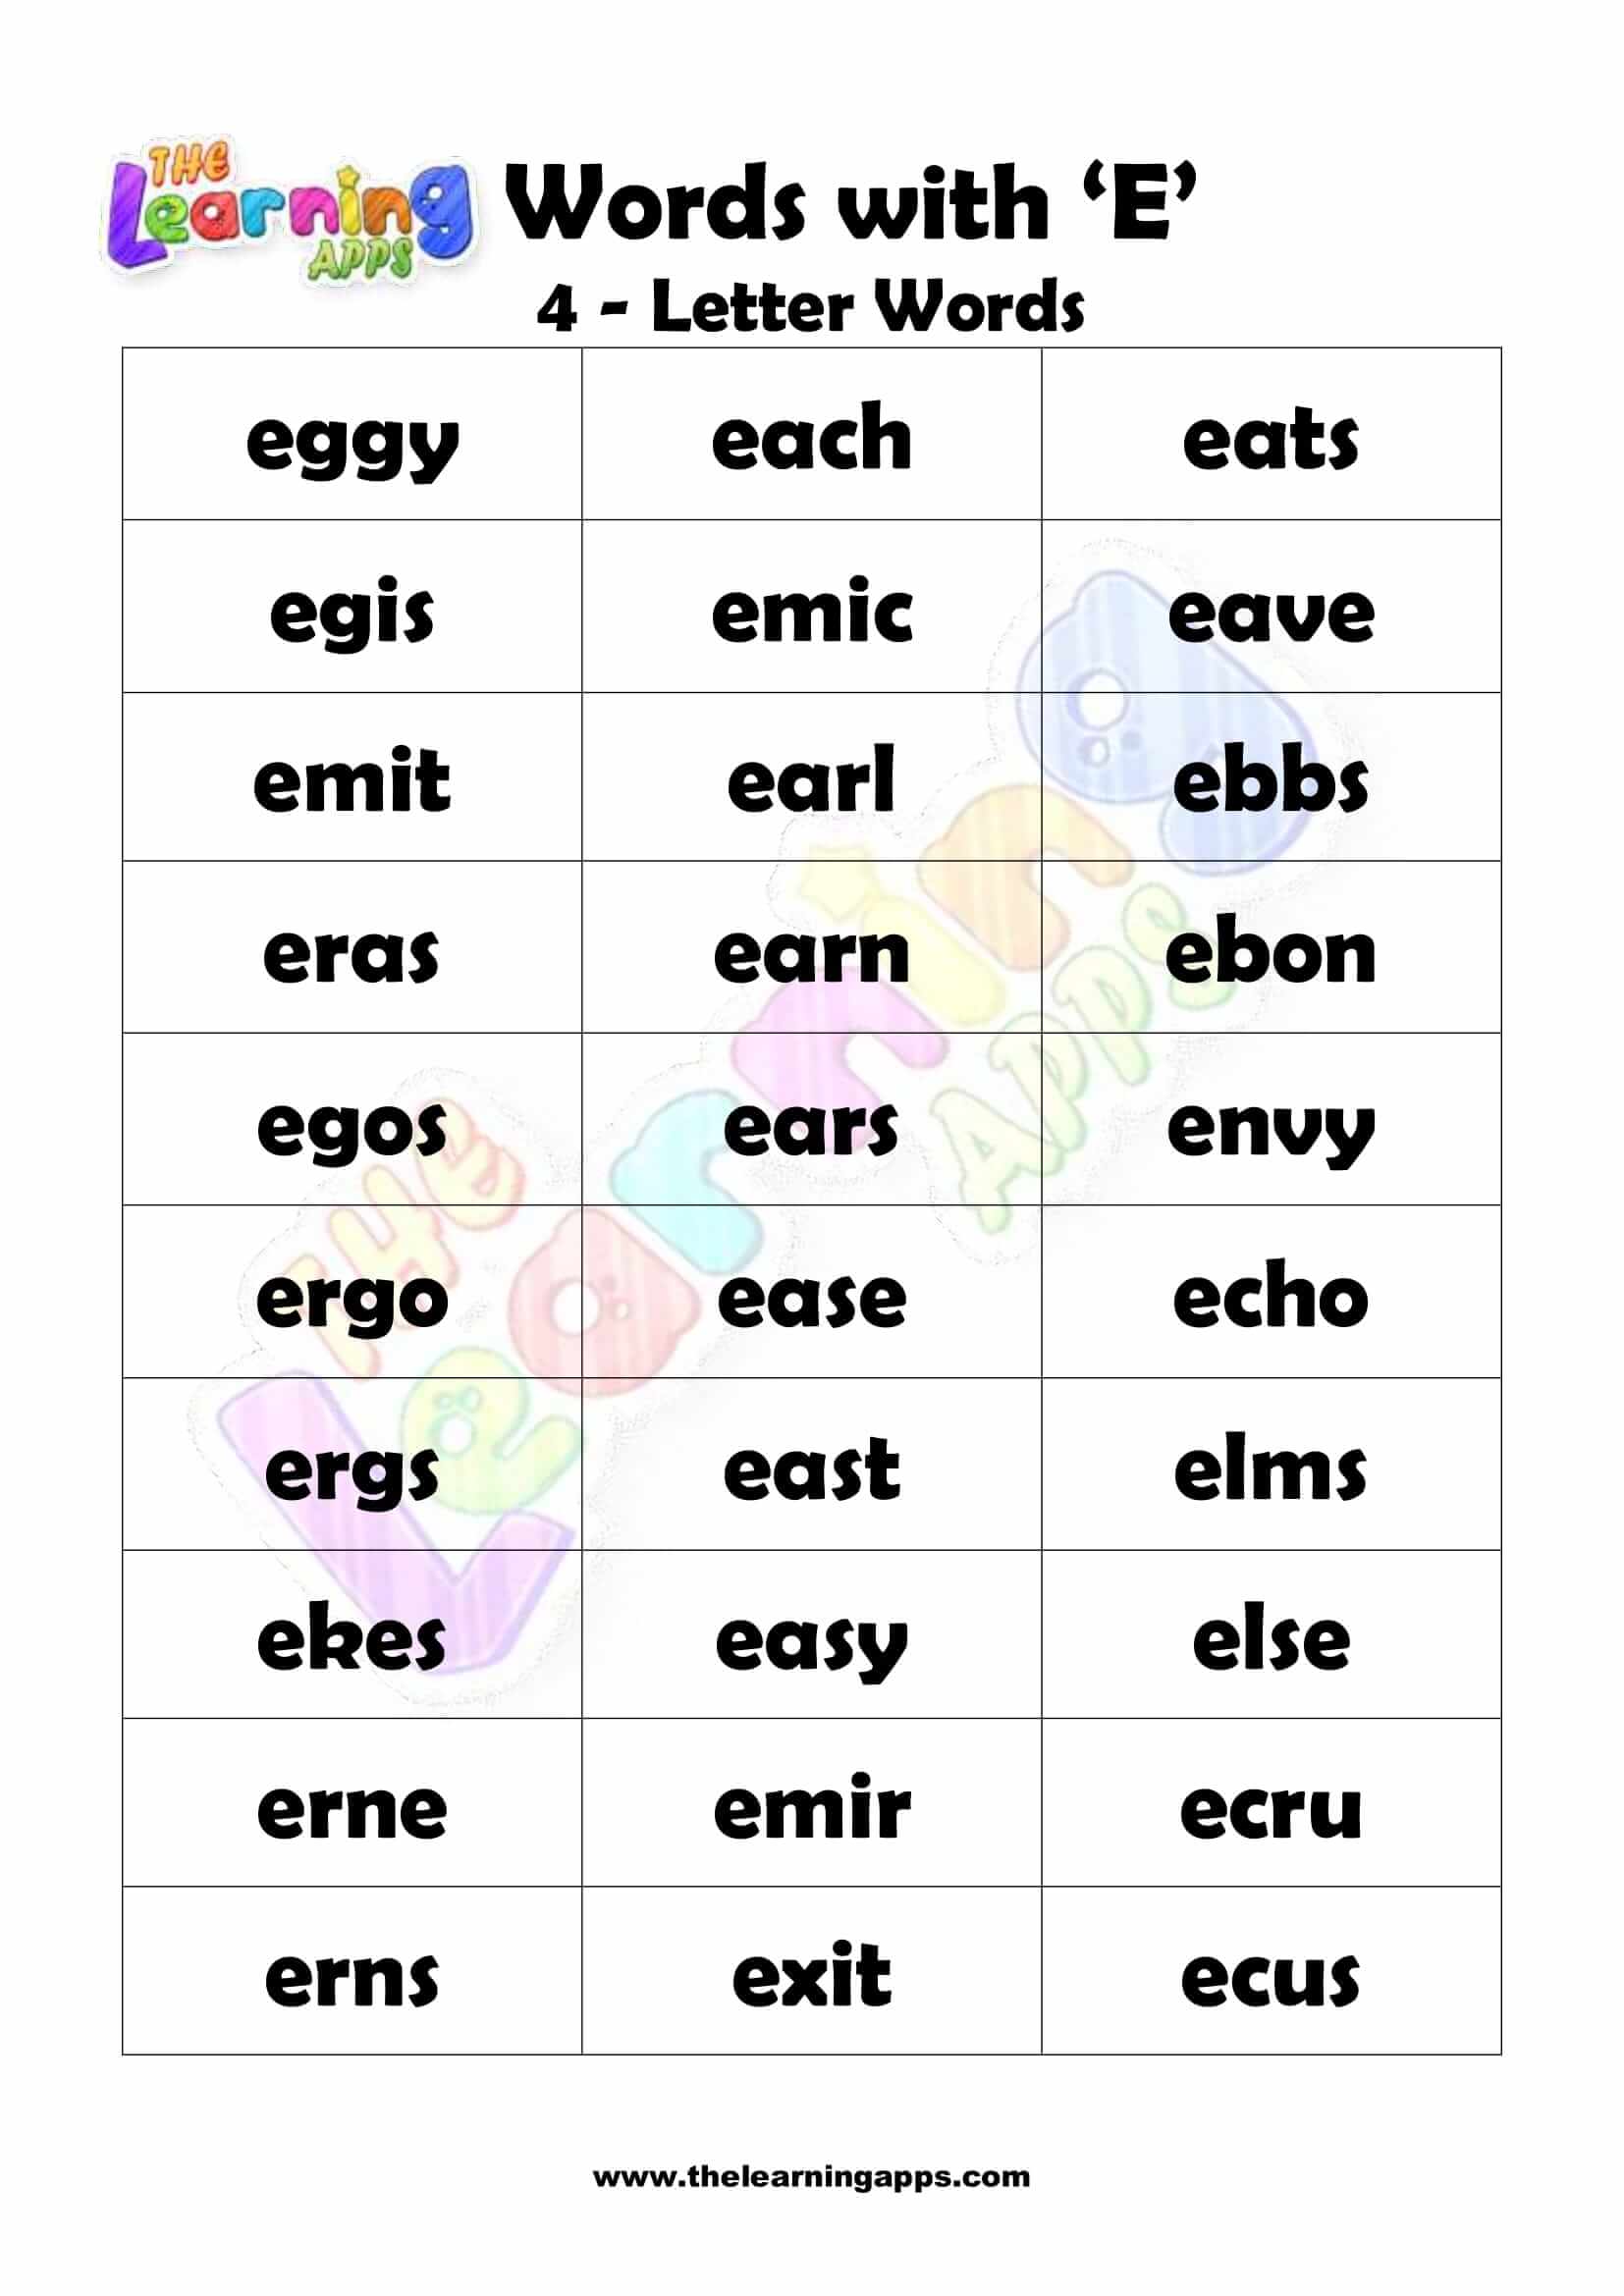 4 LETTER WORD STARTING WITH E-2